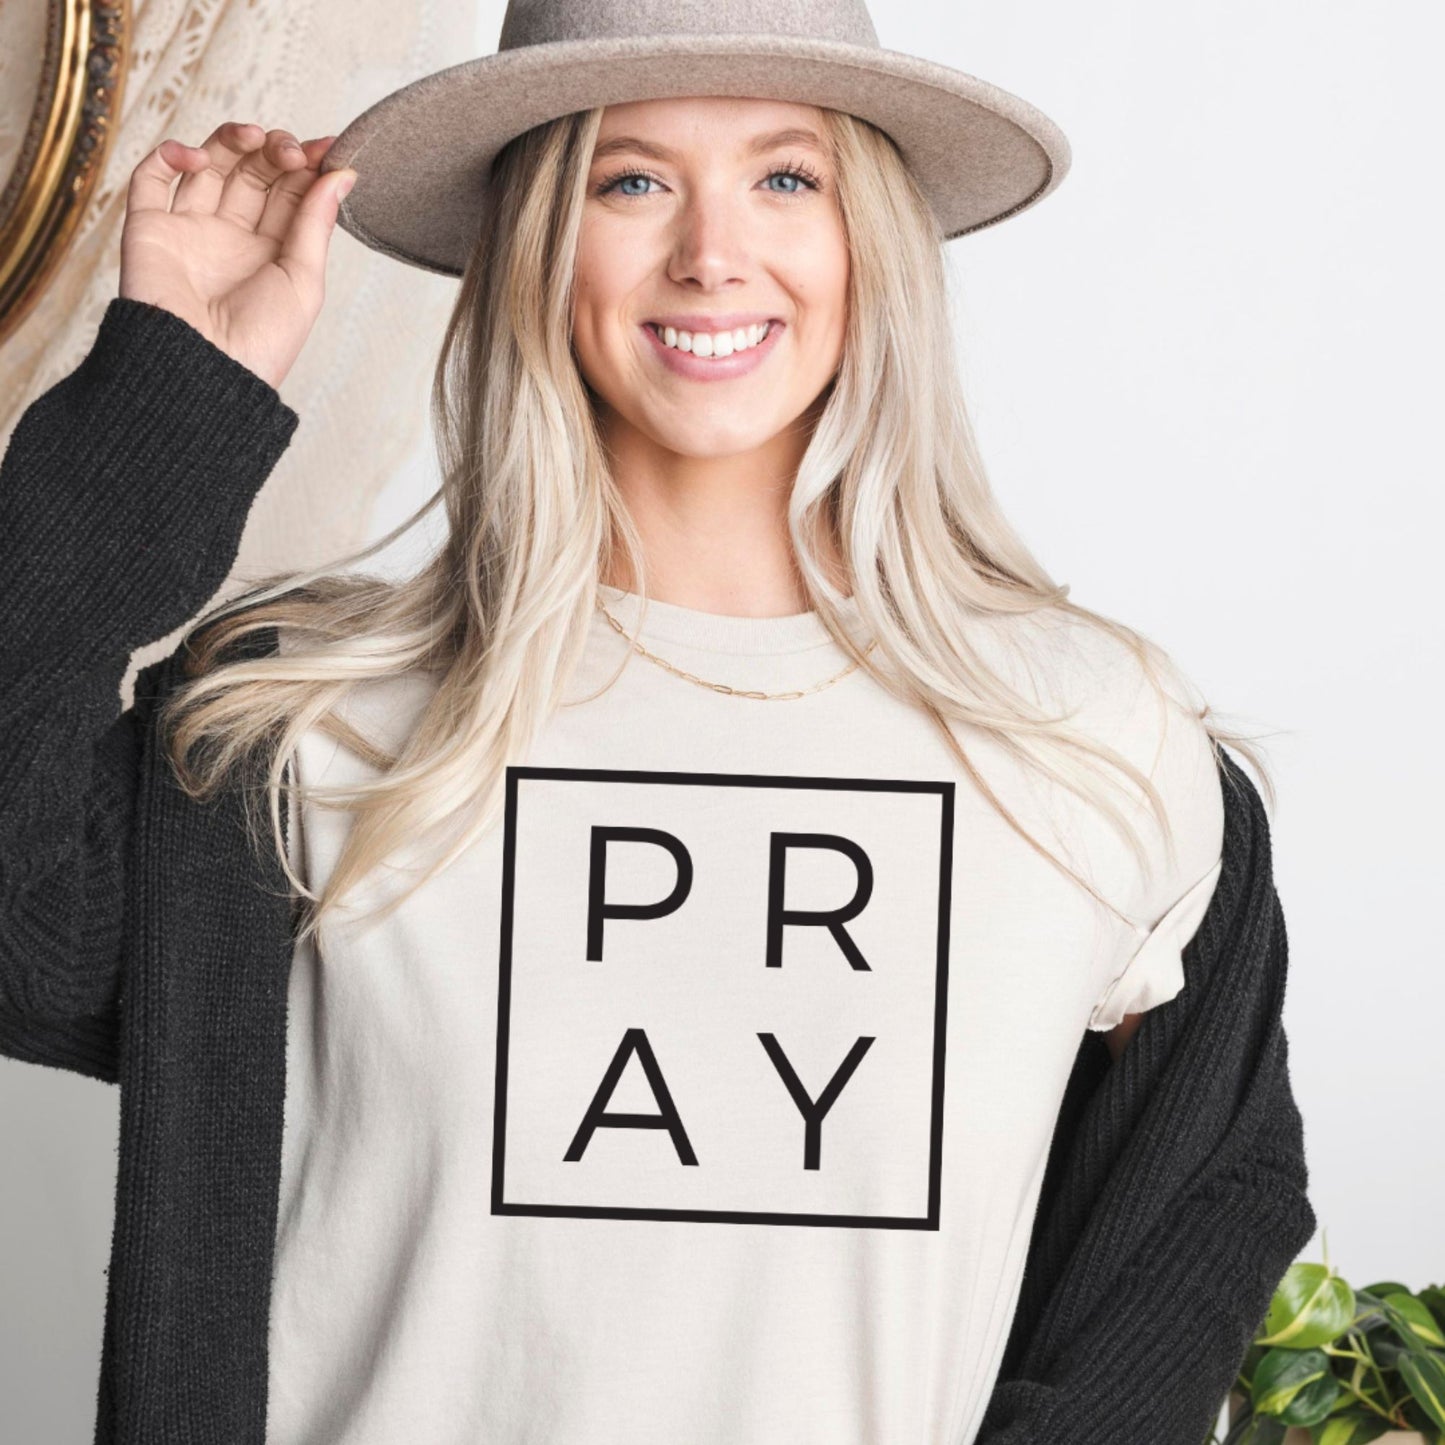 "Pray" Bella Canvas T-Shirt: Find Comfort and Strength in Faithful Design